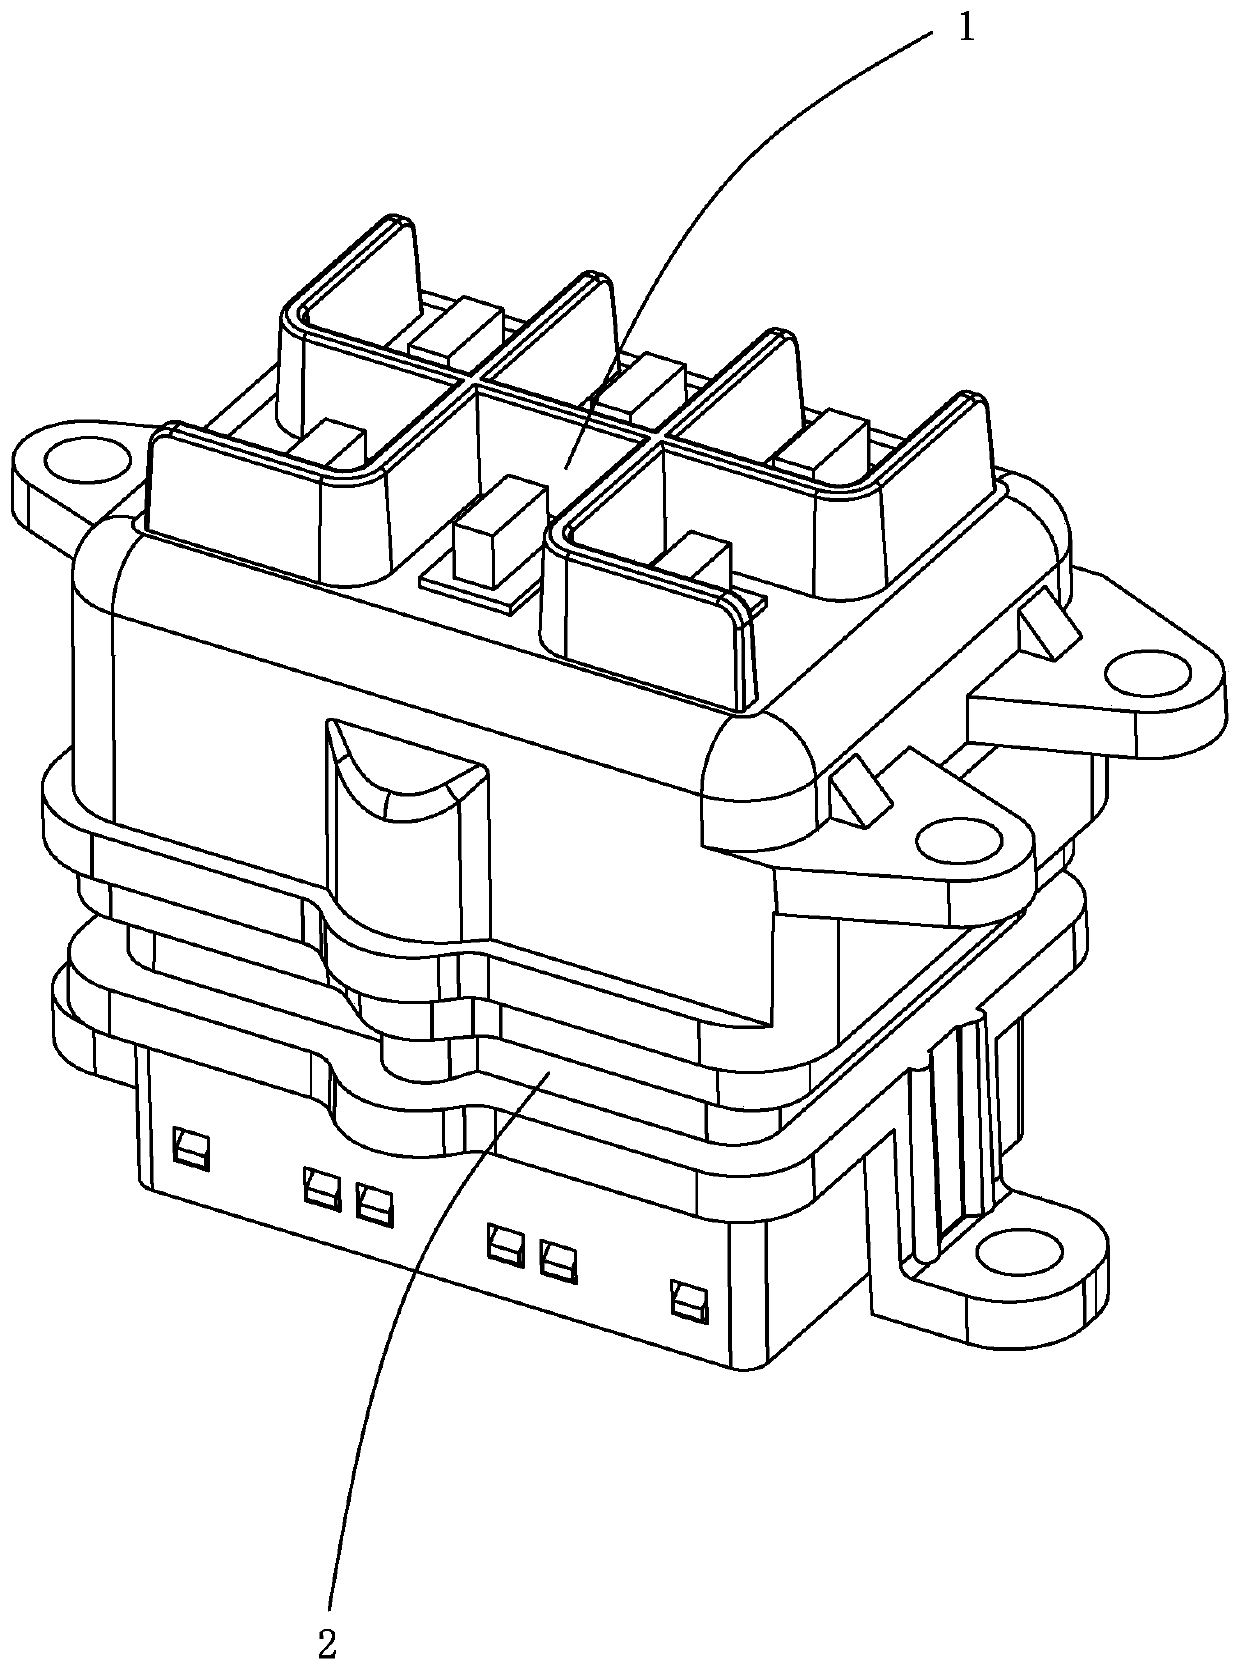 Lower coupler capable of positioning and supporting sealing gasket and coupler